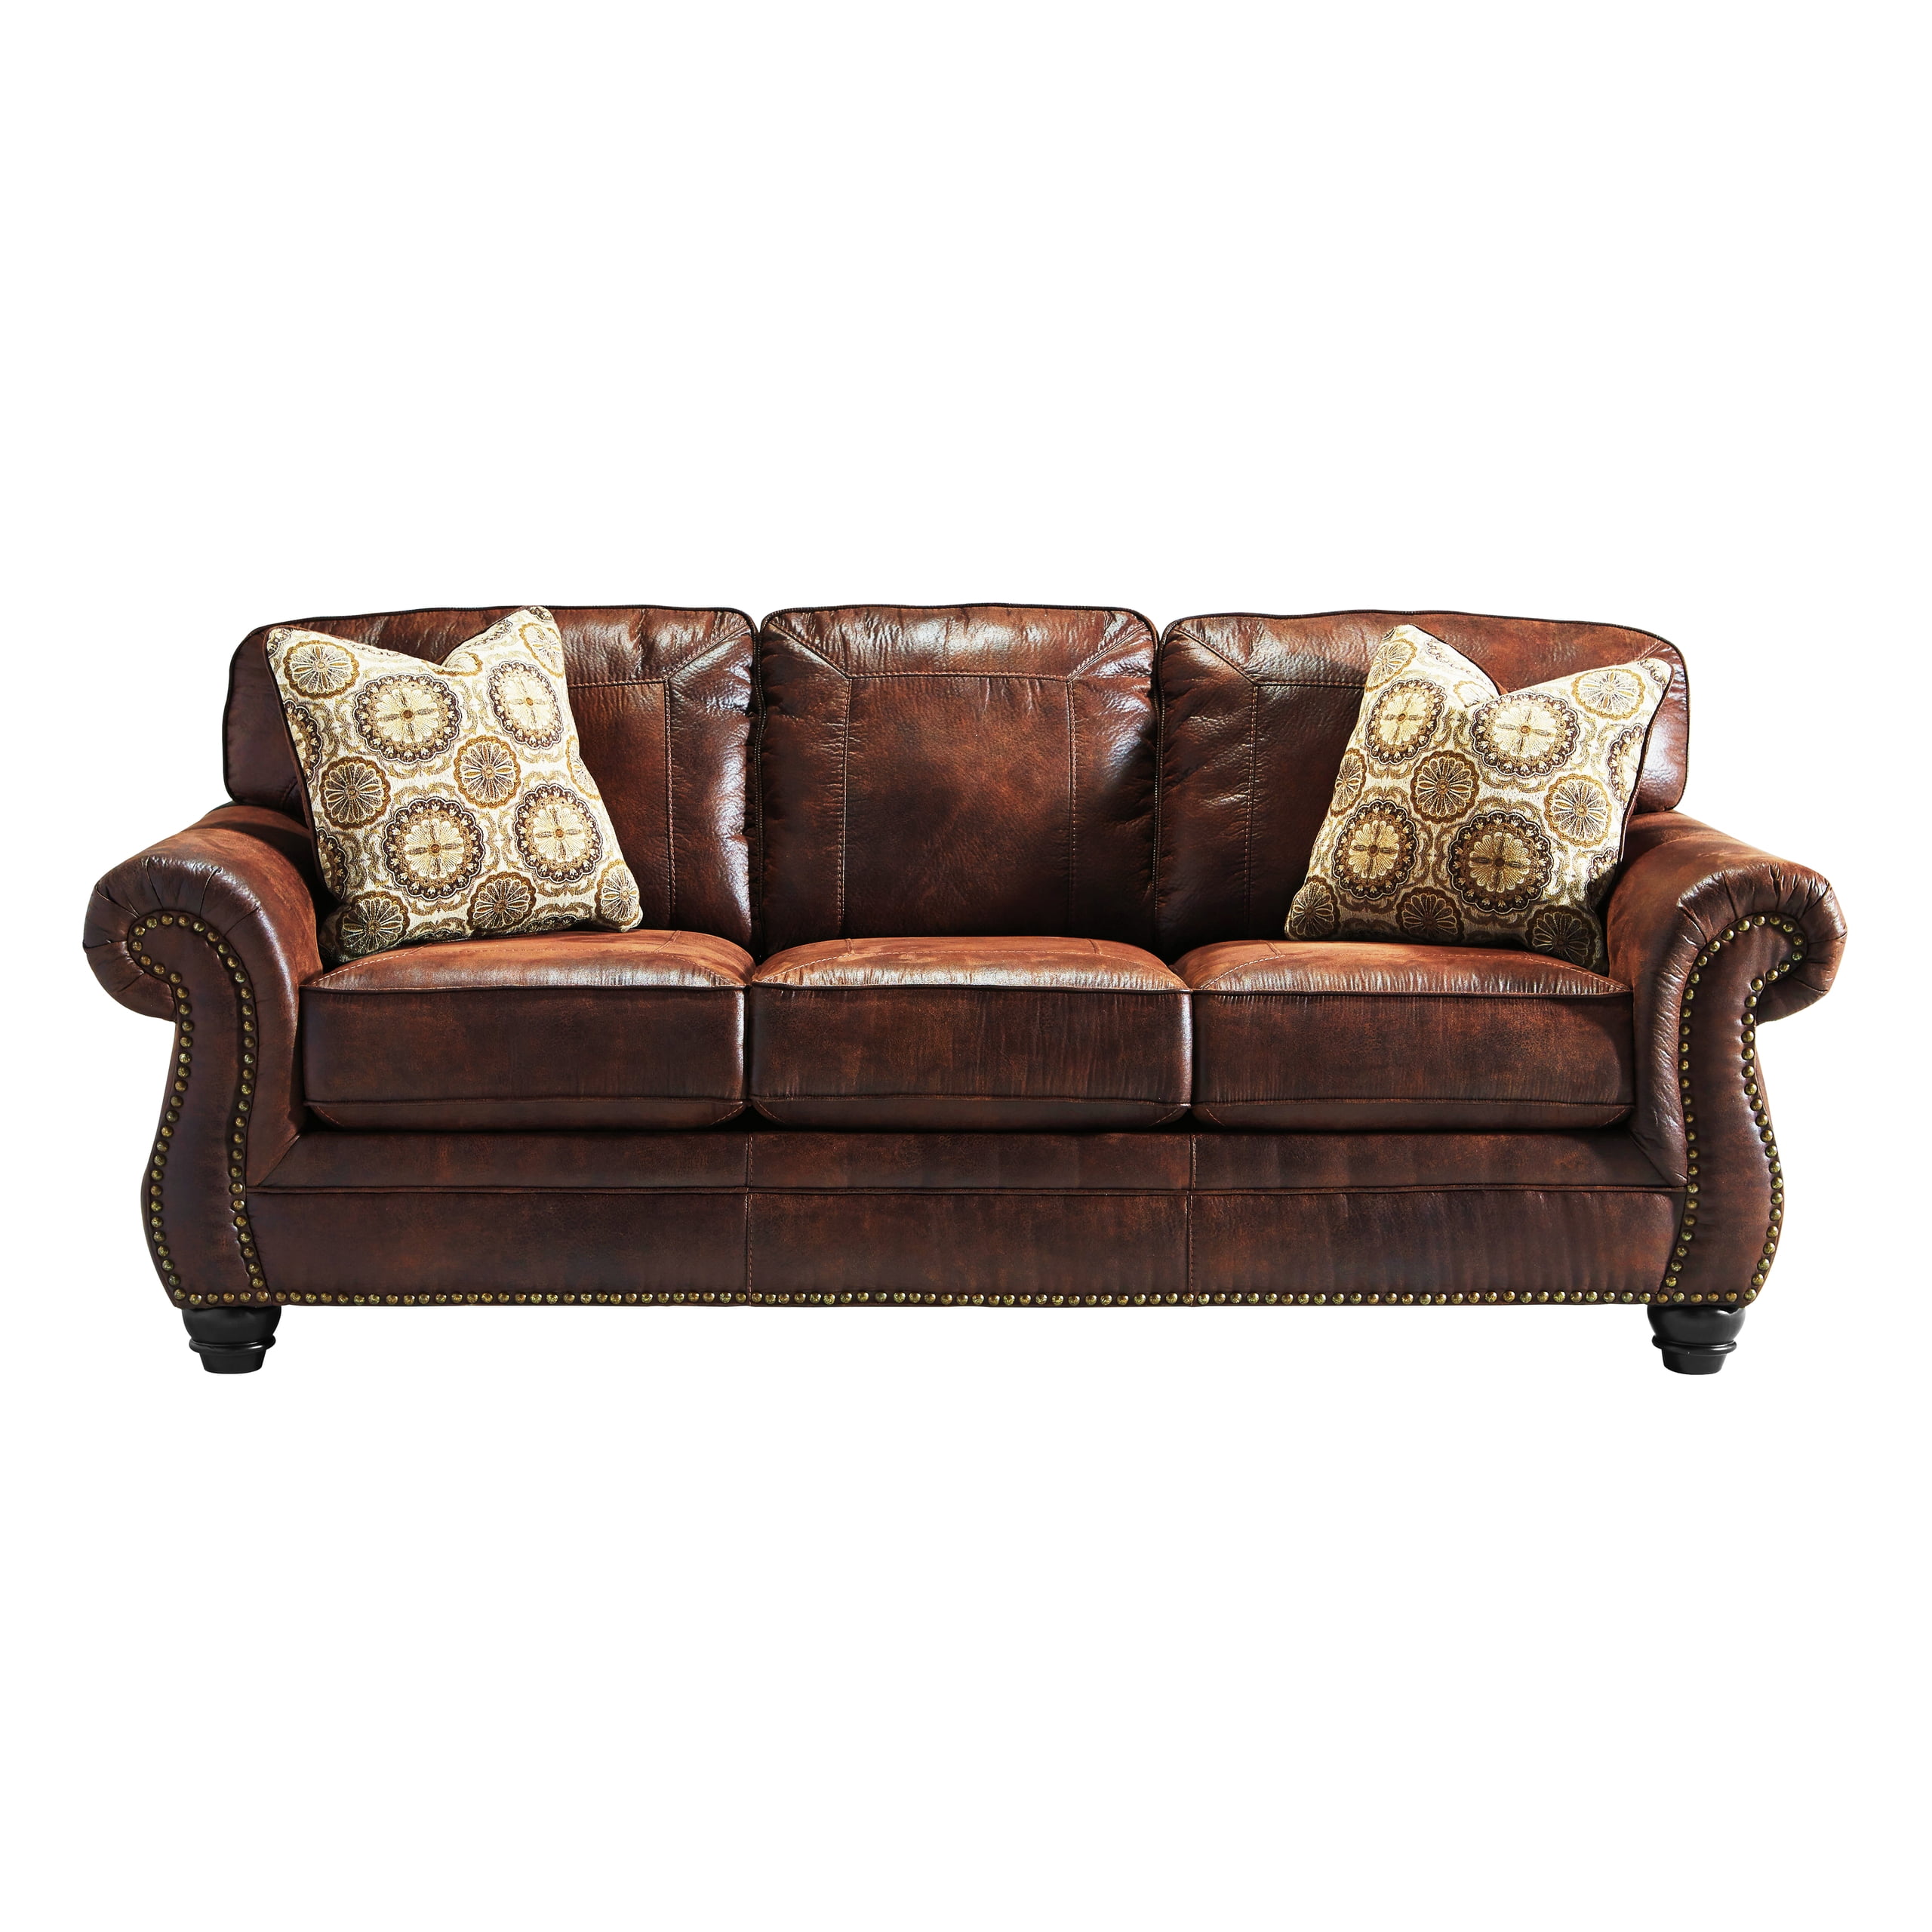 Throw Pillows For Brown Couch, Accent Pillows On Leather Sofa